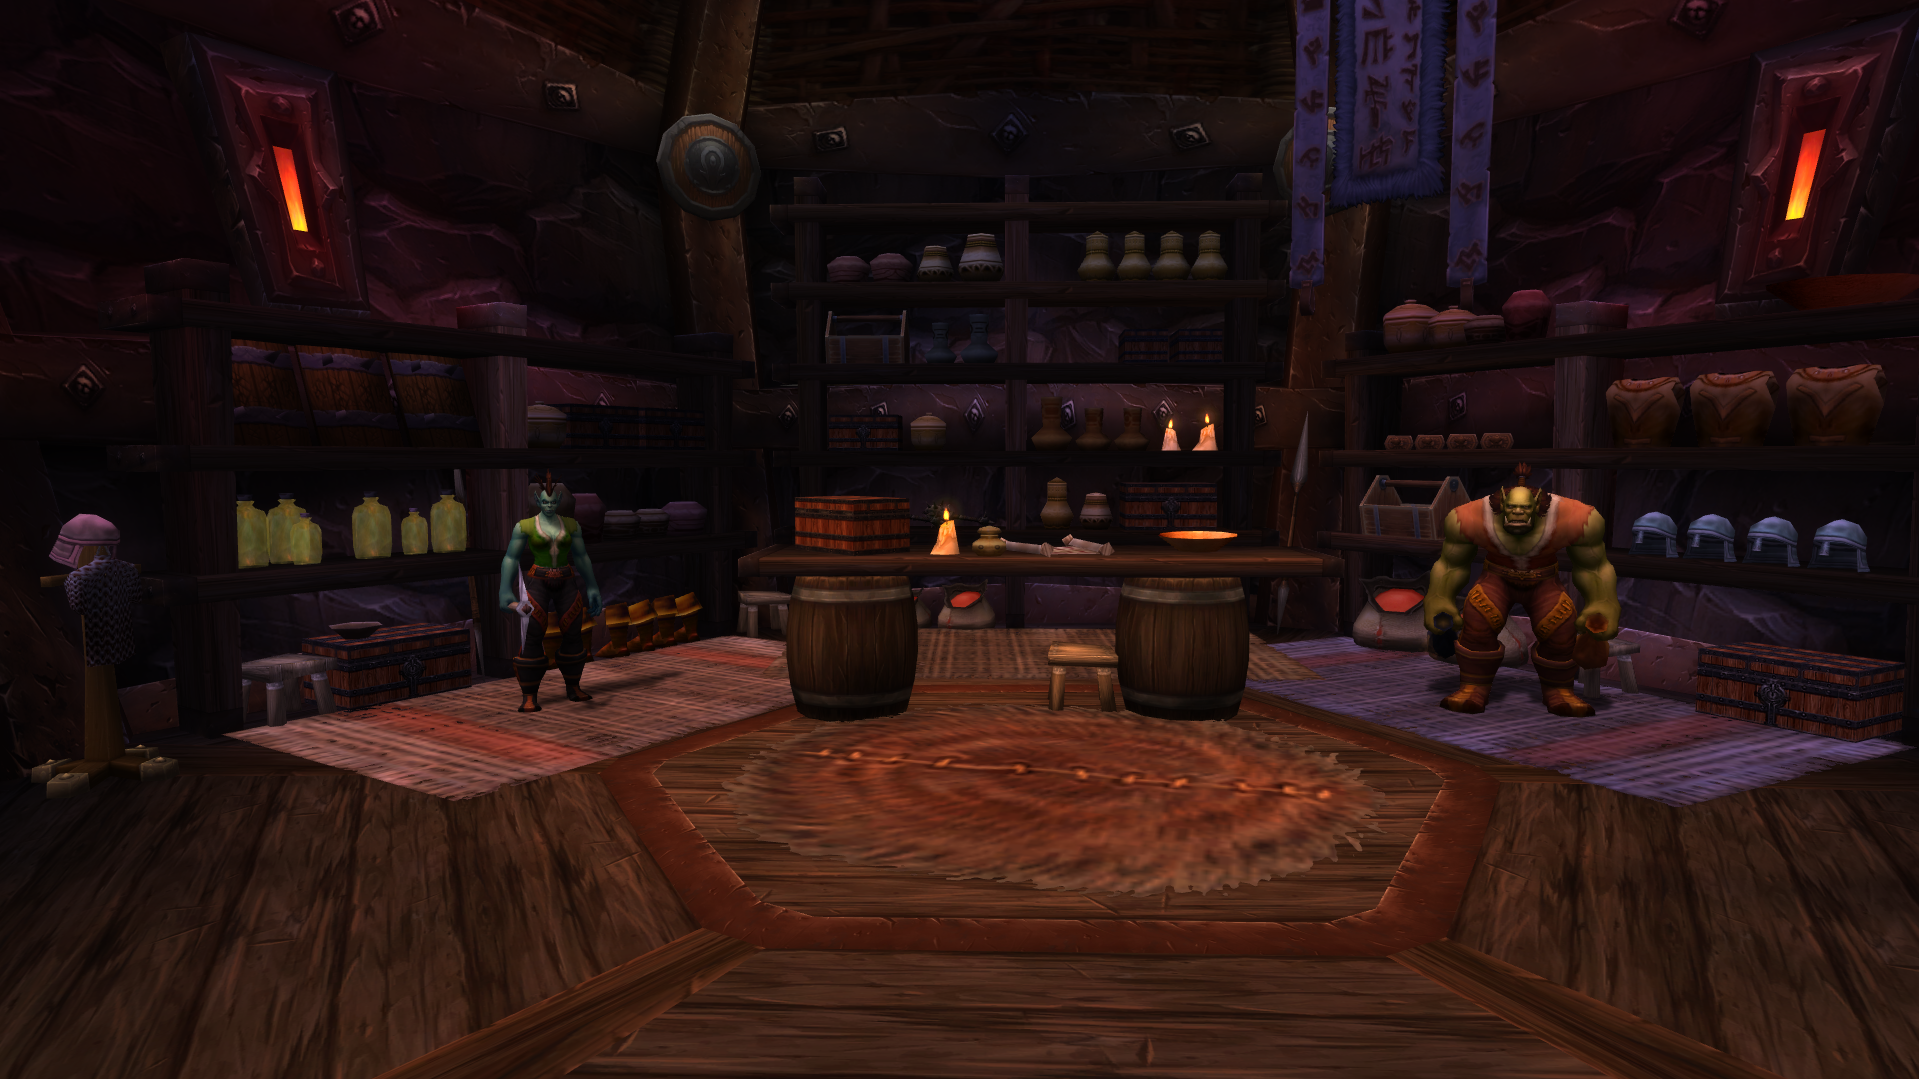 Gold Farming In Classic Wow: Strategies For Accumulating Wealth In The Vanilla Era